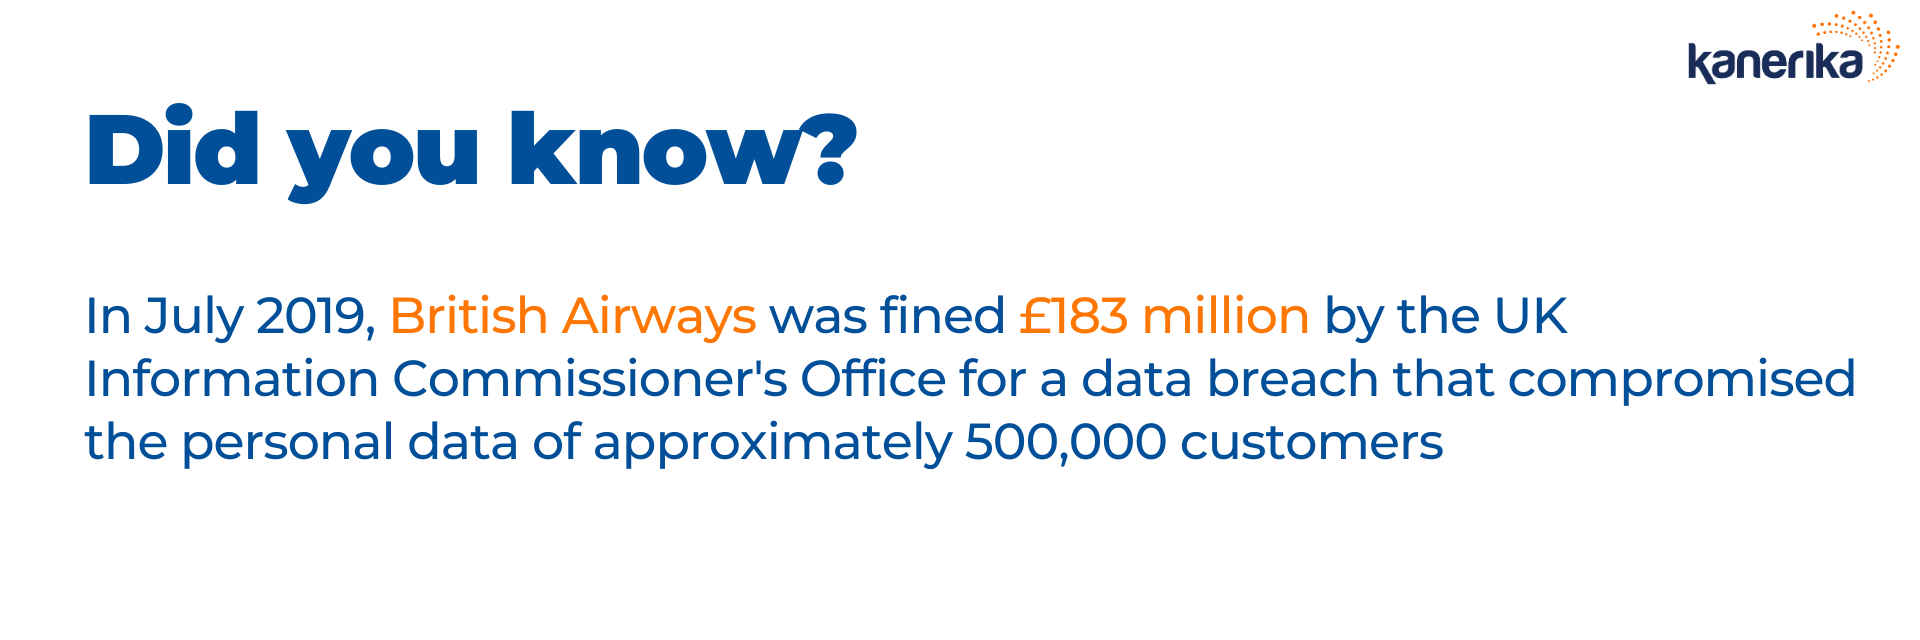 Did you know - British Airways Fined for GDPR fault